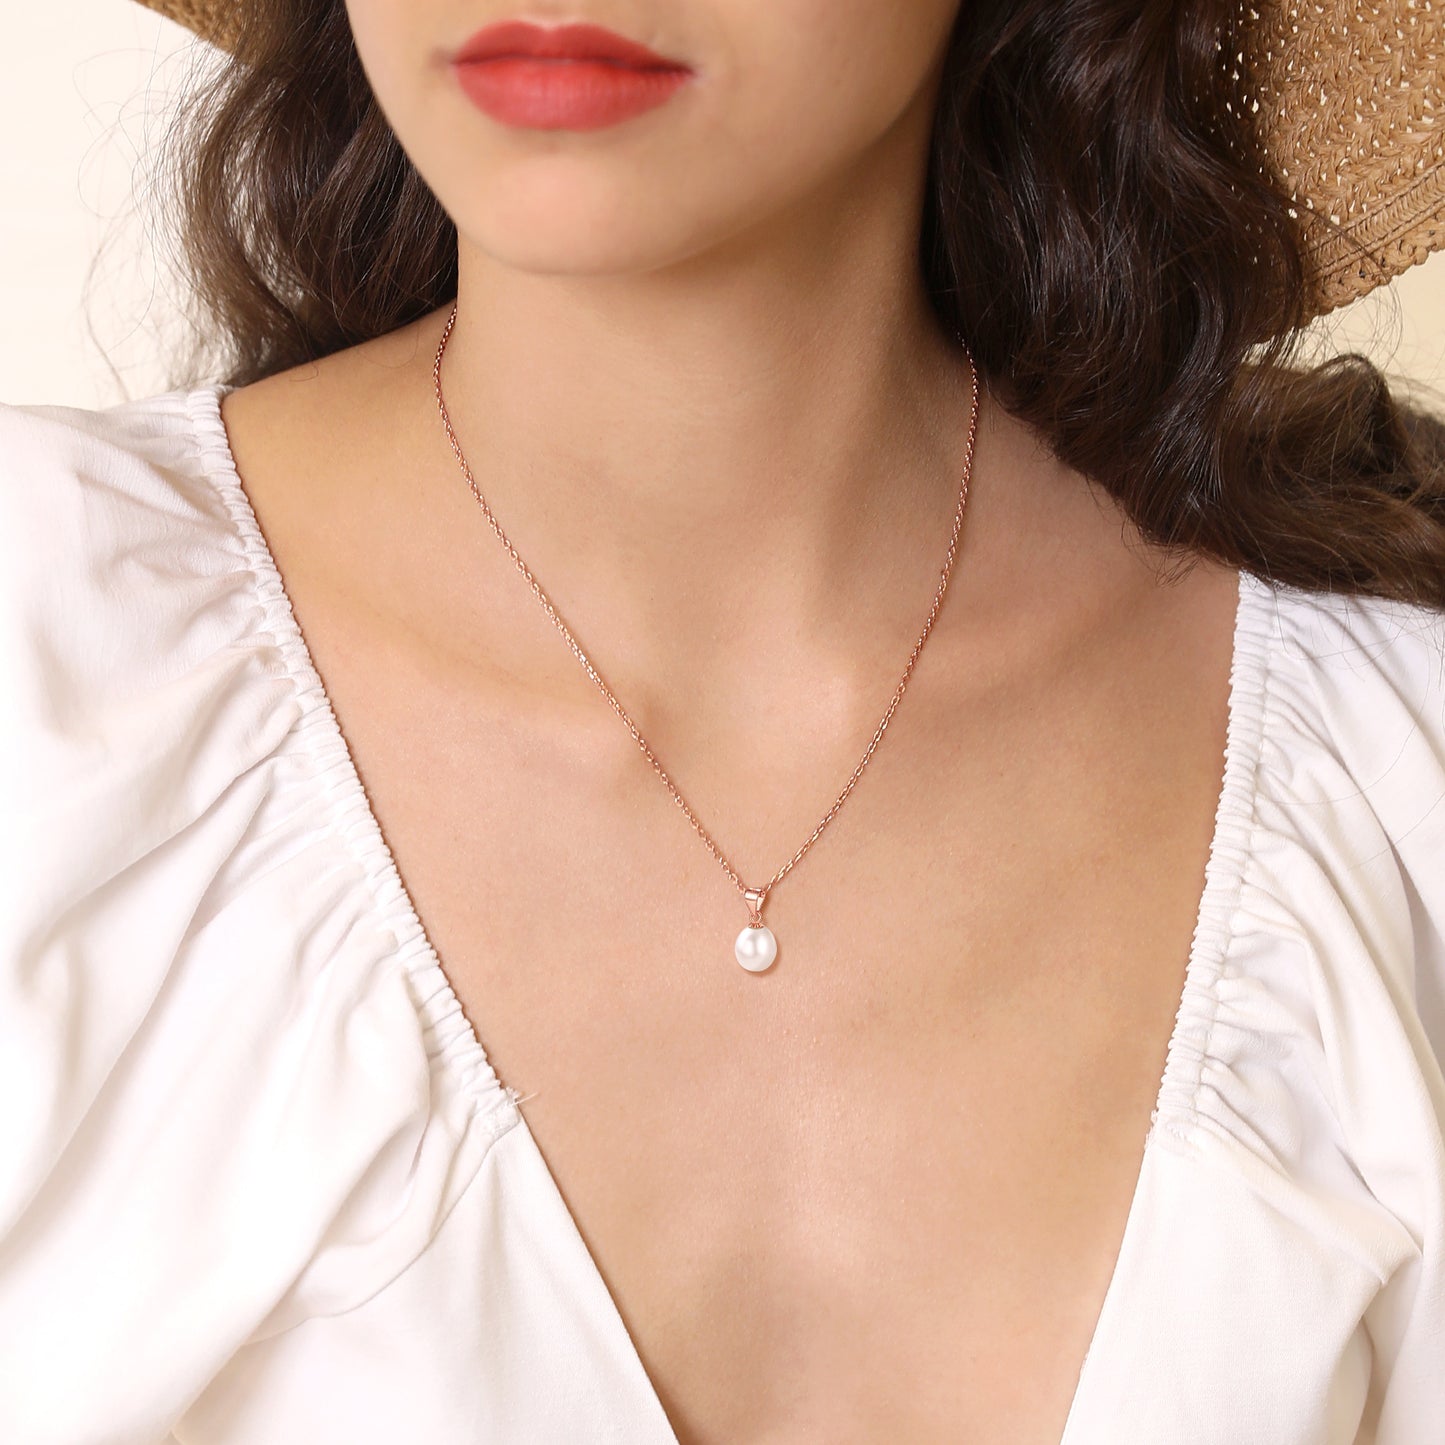 Classic Sterling Silver Single Pearl Pendant Necklace